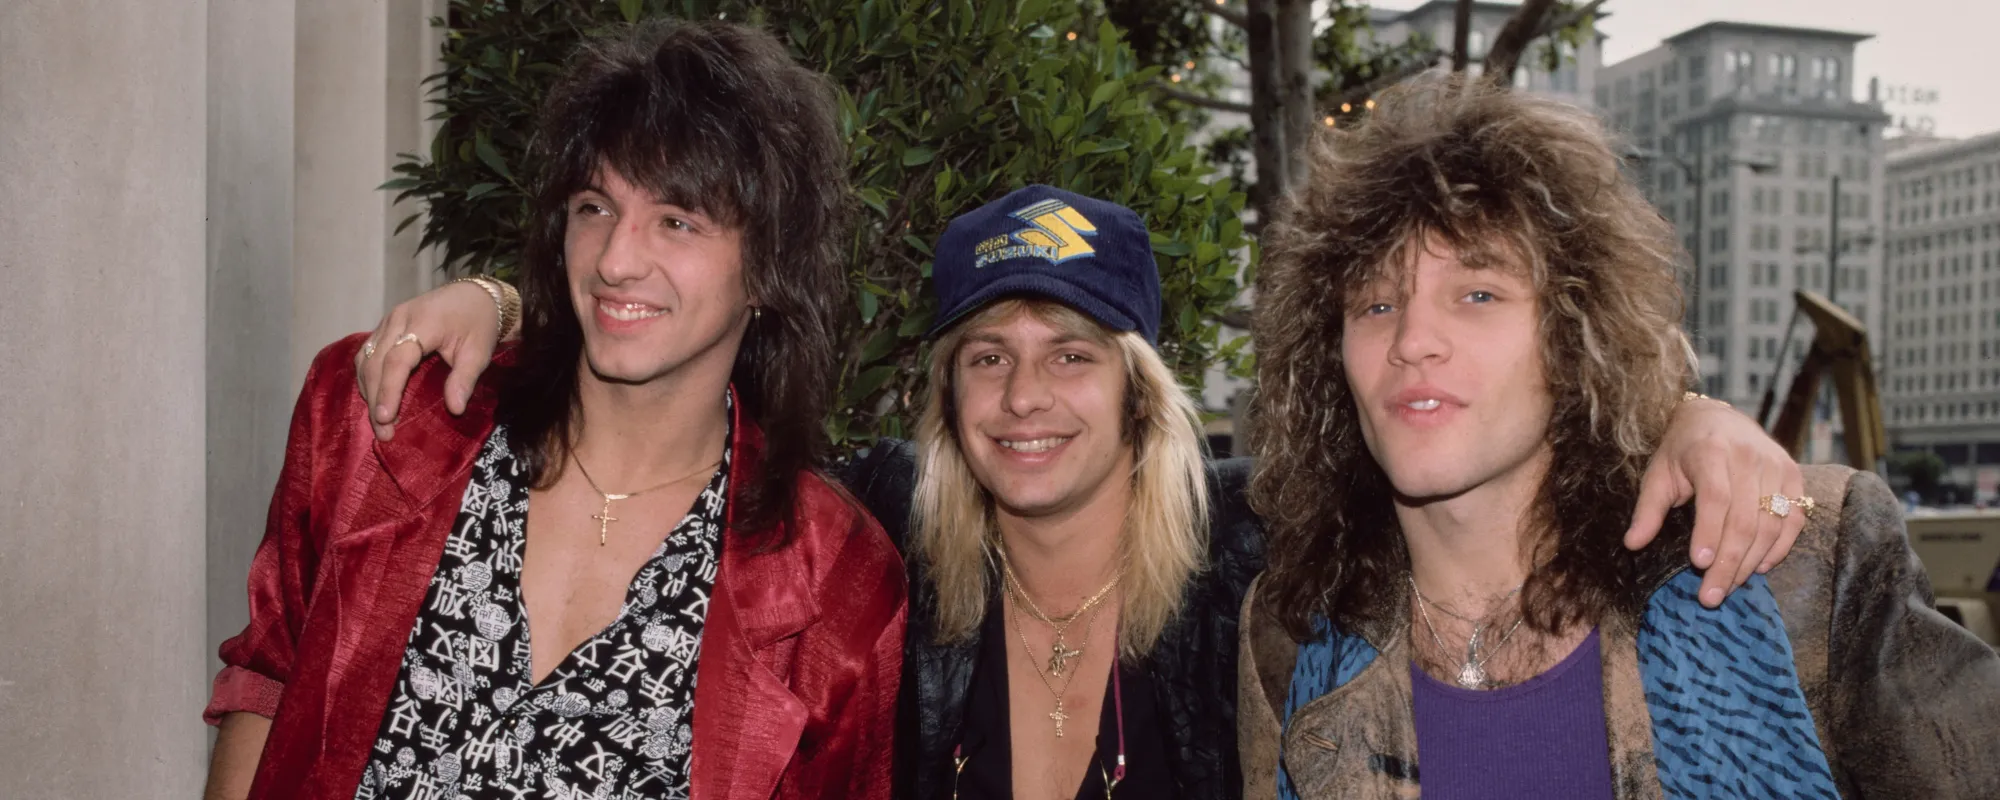 The Meaning Behind “Lay Your Hands on Me” by Bon Jovi and How it Symbolized the Band’s Connection with Their Fans